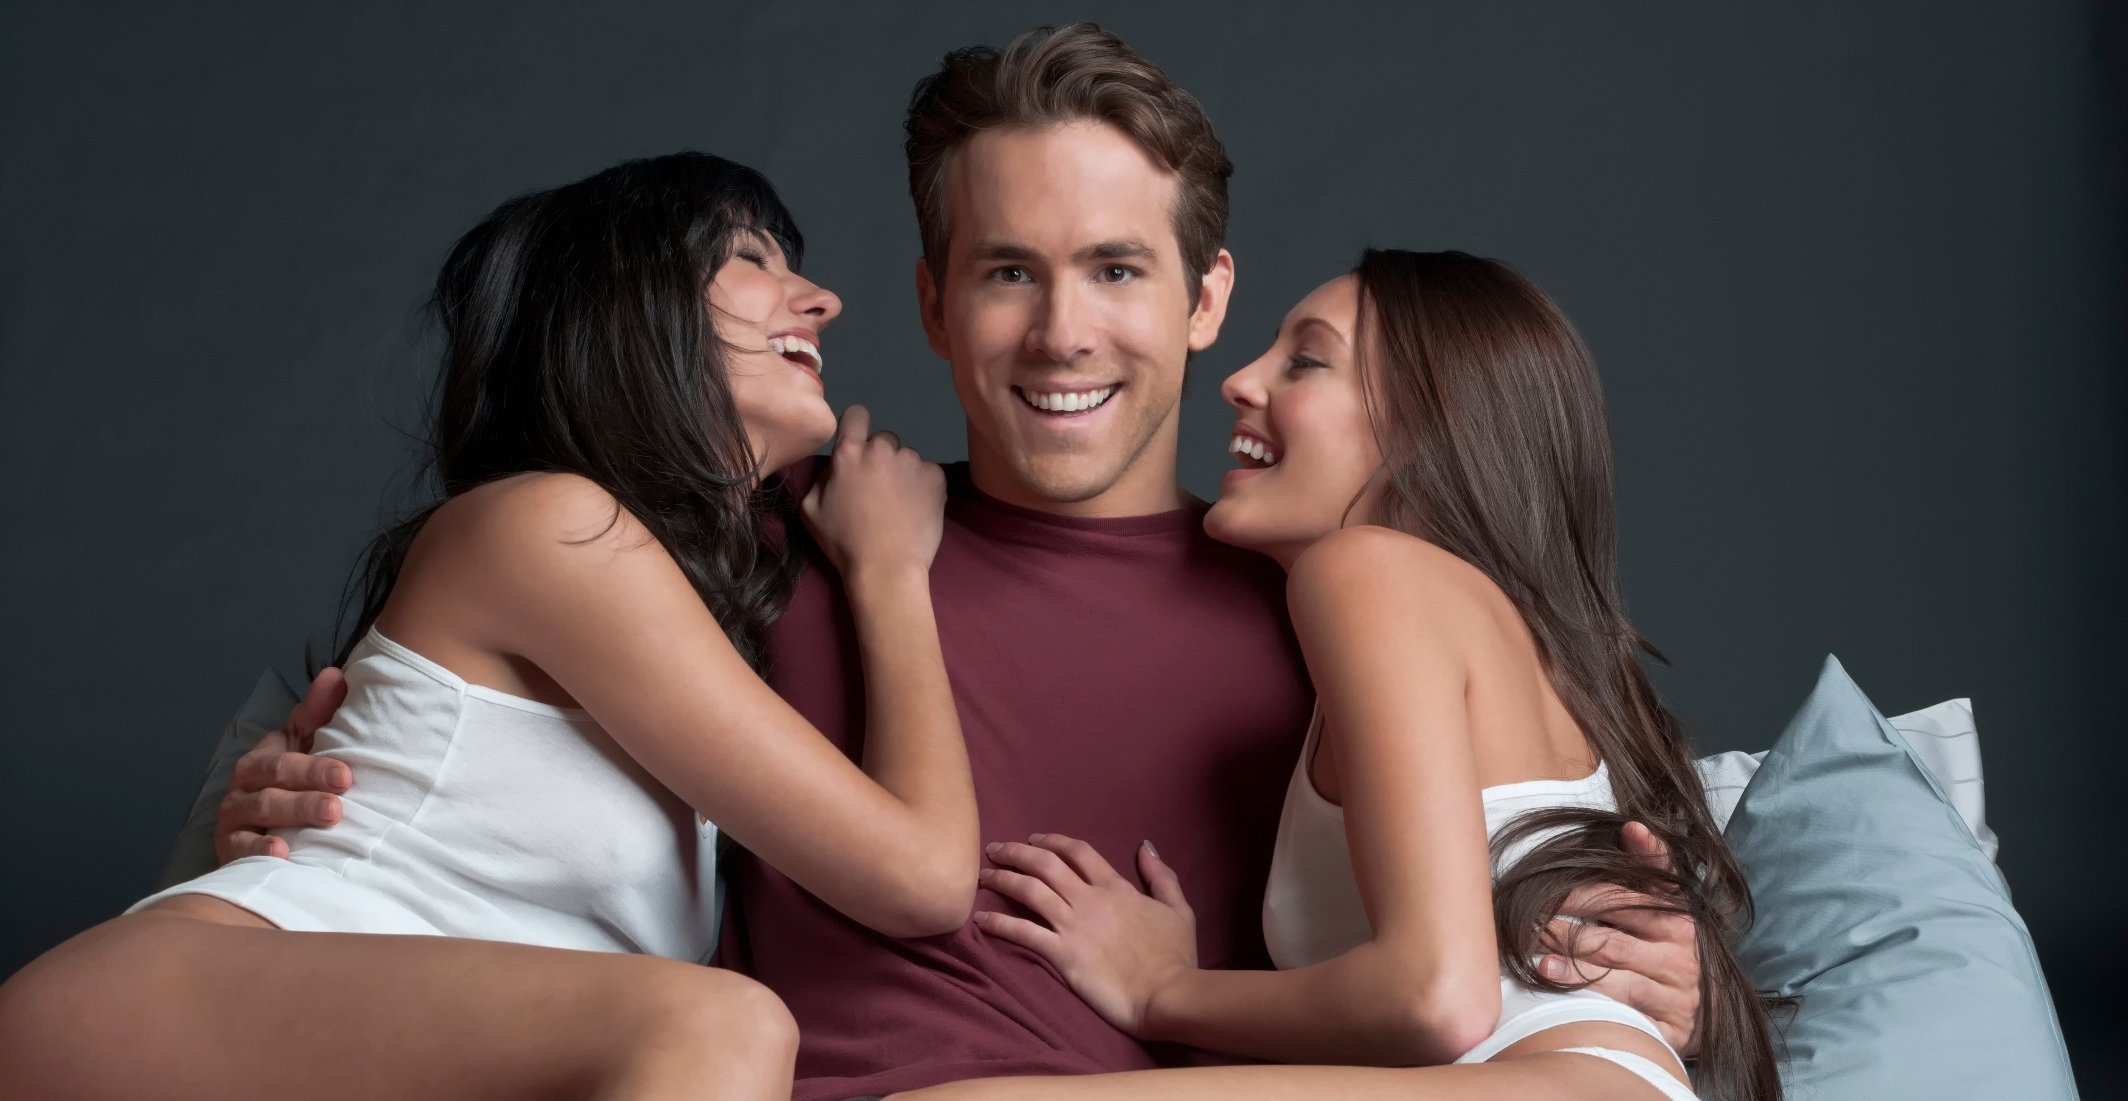 Threesome man and woman on woman